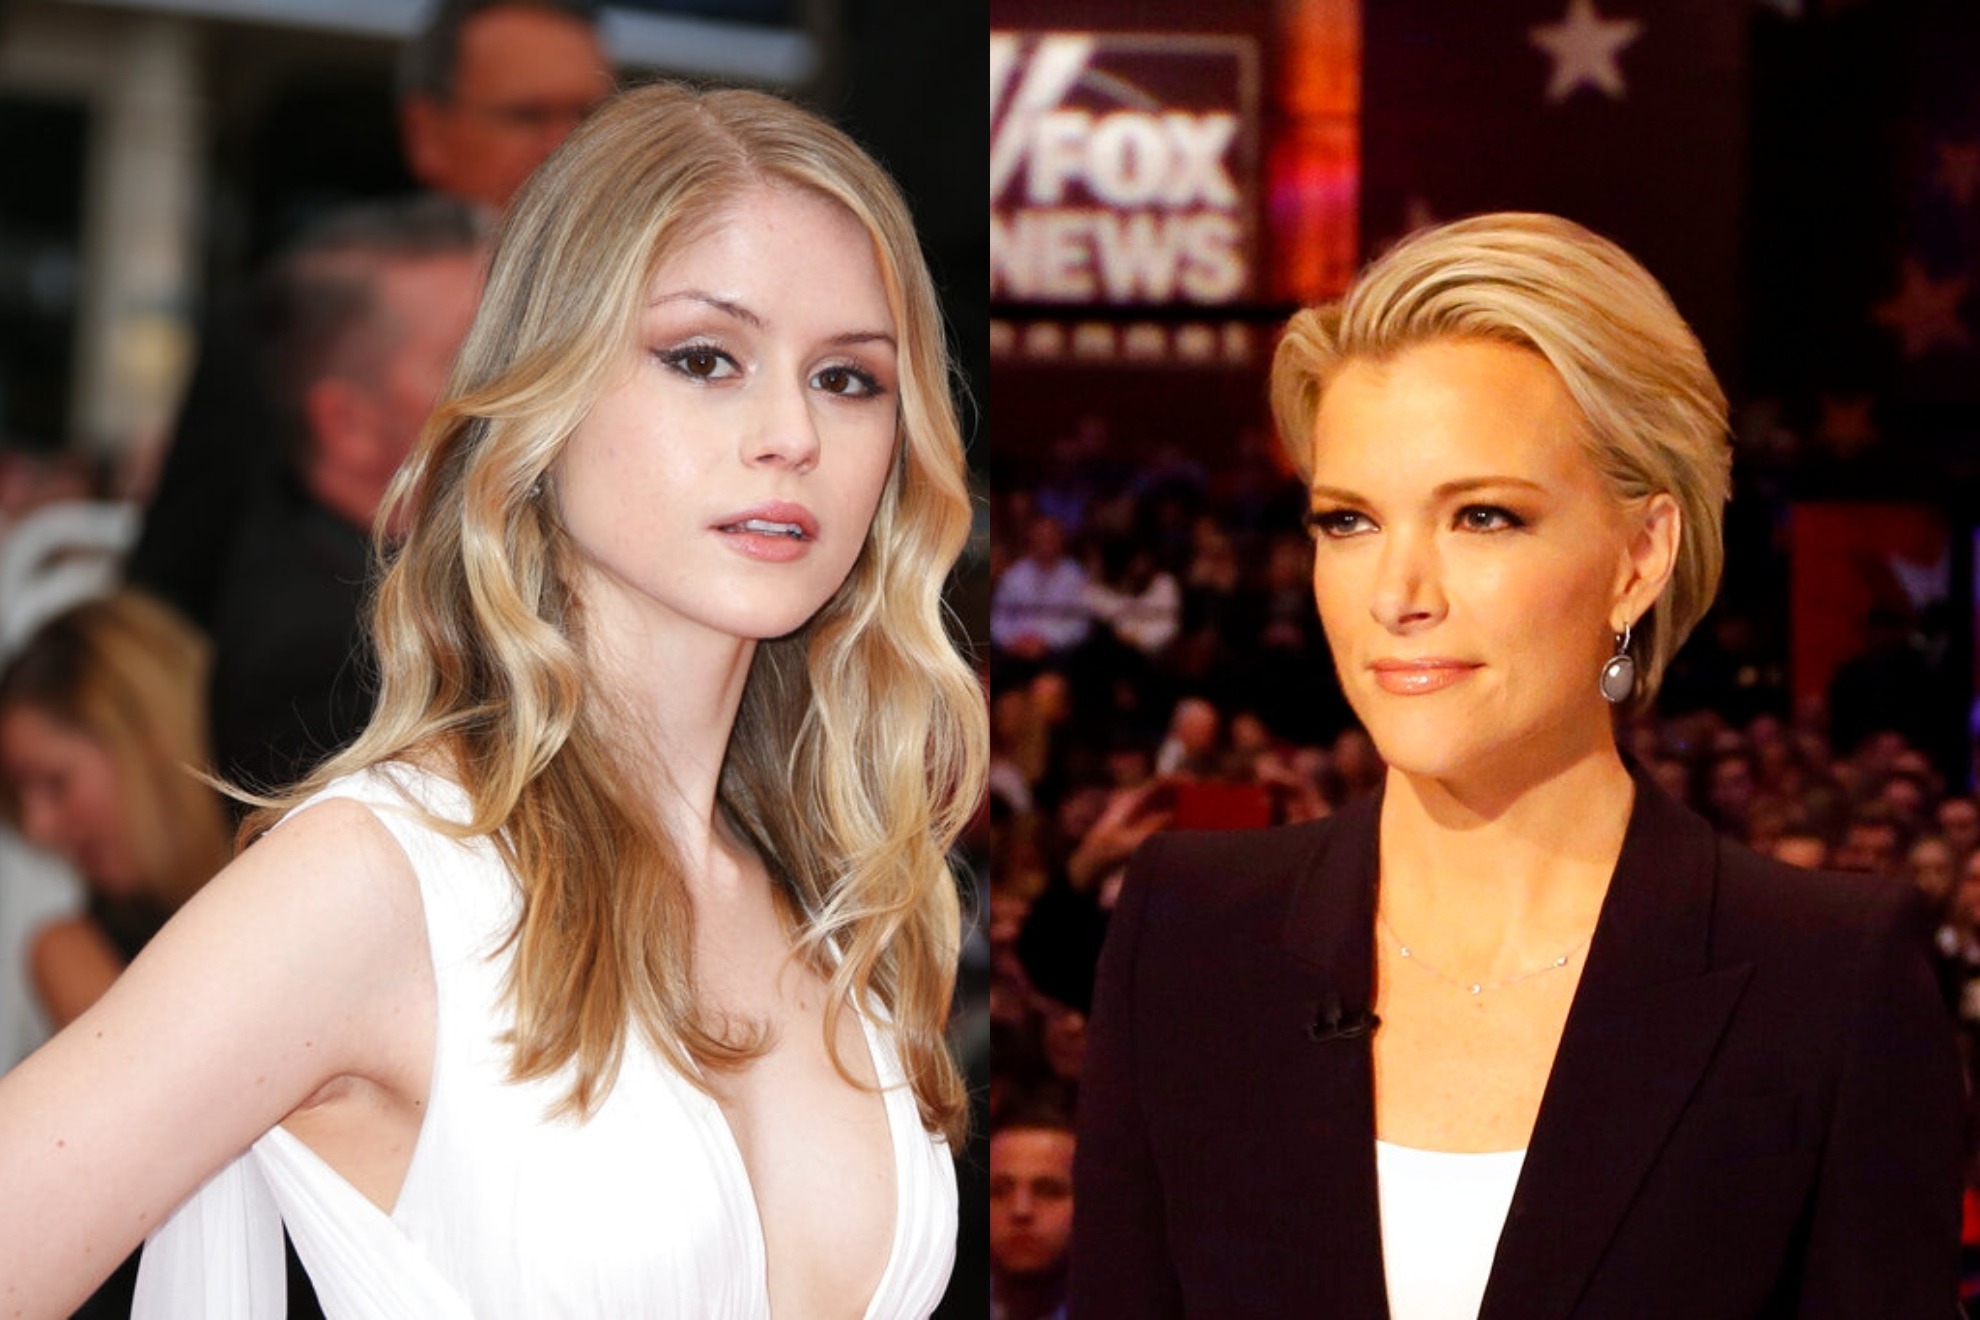 Erin Moriarty receives actors and showrunners upport after Megyn Kellys plastic surgery rant